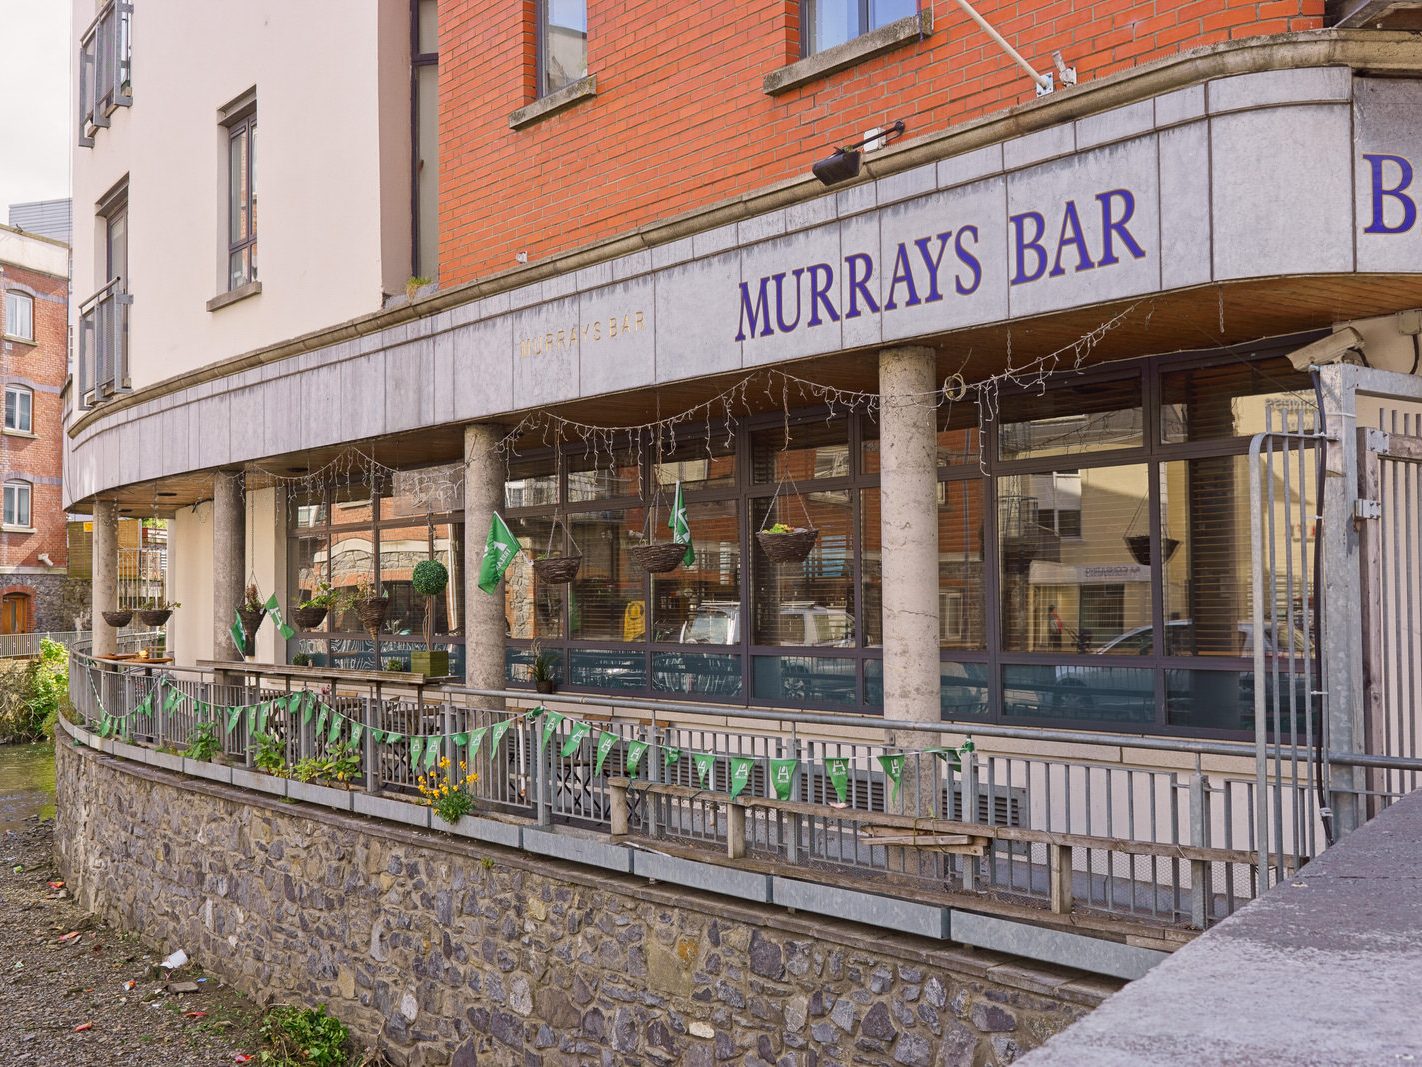 MURRAY's BAR BOW BRIDGE PLACE AS IT WAS IN 2016 [HAS SINCE BEEN SOLD]-227587-1